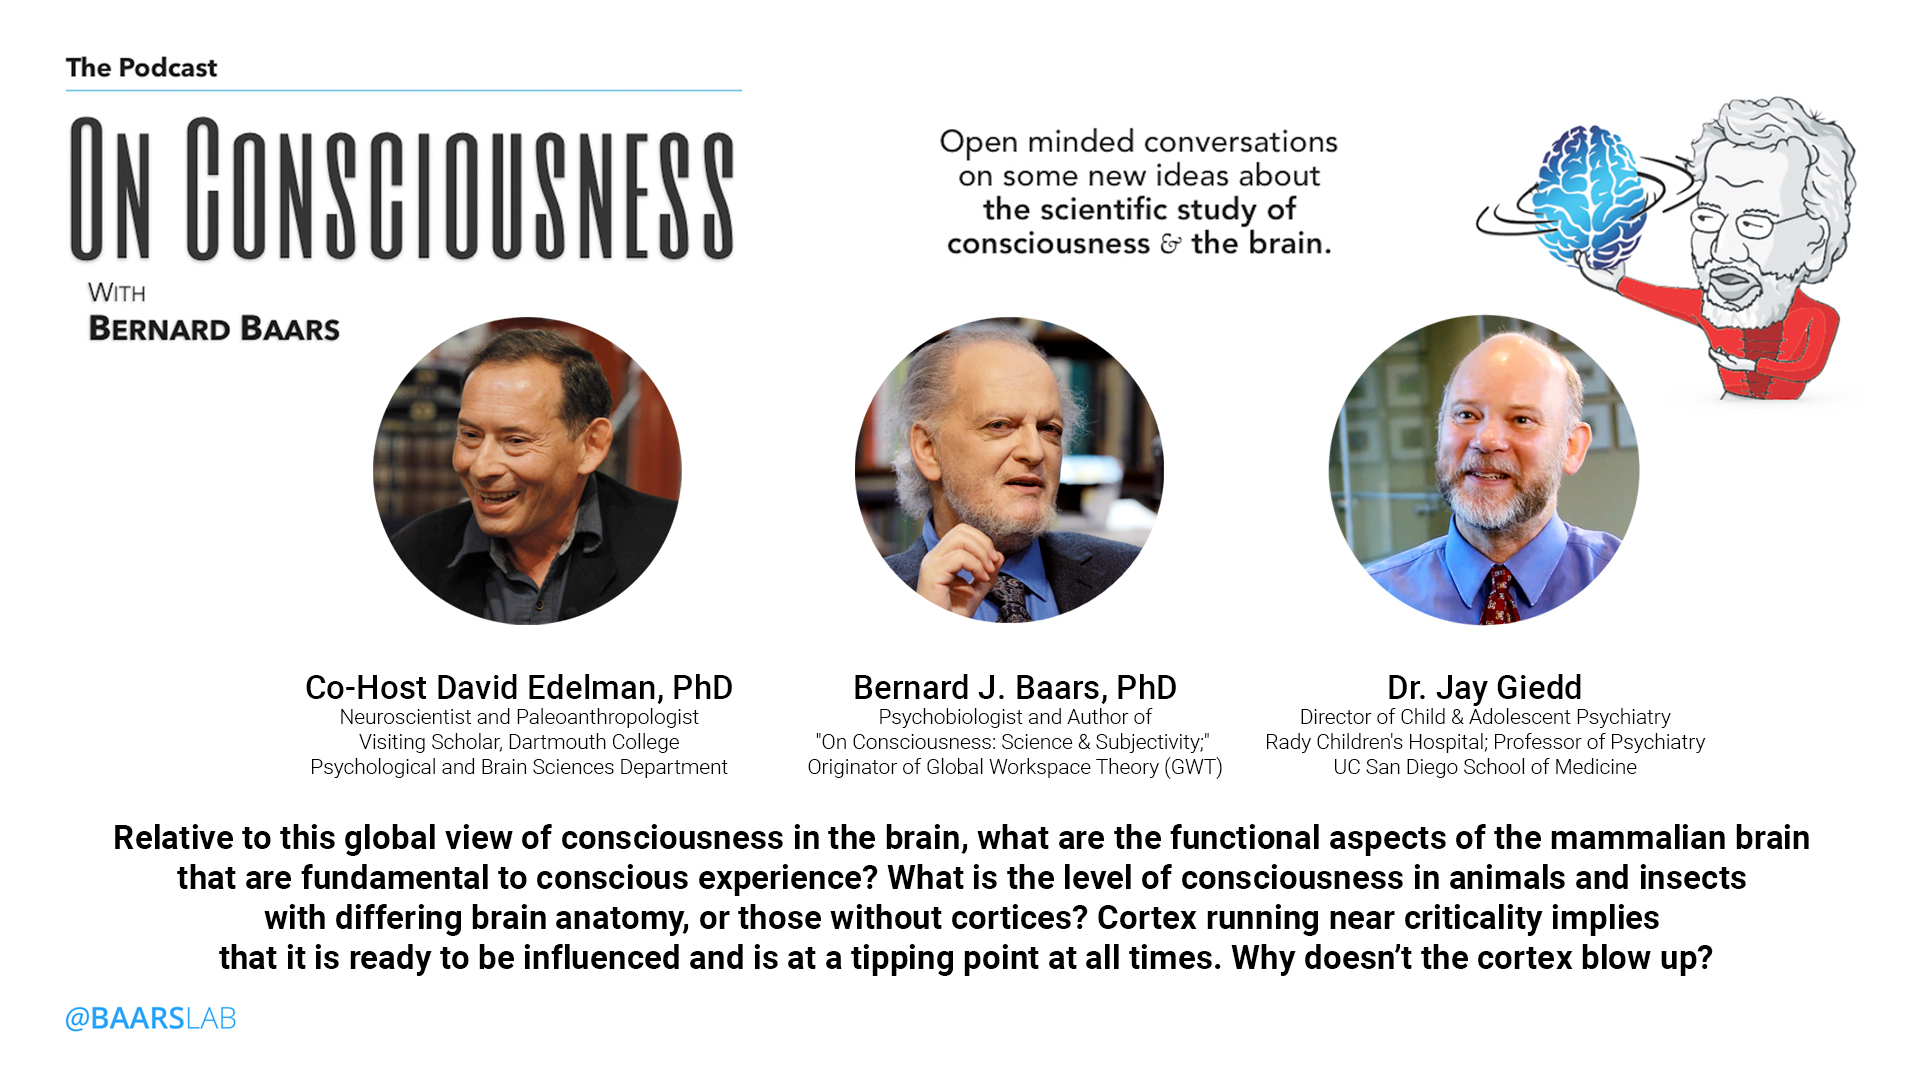 ep-11-roundtable-part-4-consciousness-the-means-by-which-memories-are-established-dr-jay-giedd-david-edelman-with-bernard-baars-on-consciousness-neruosciencemp3_830un.jpg